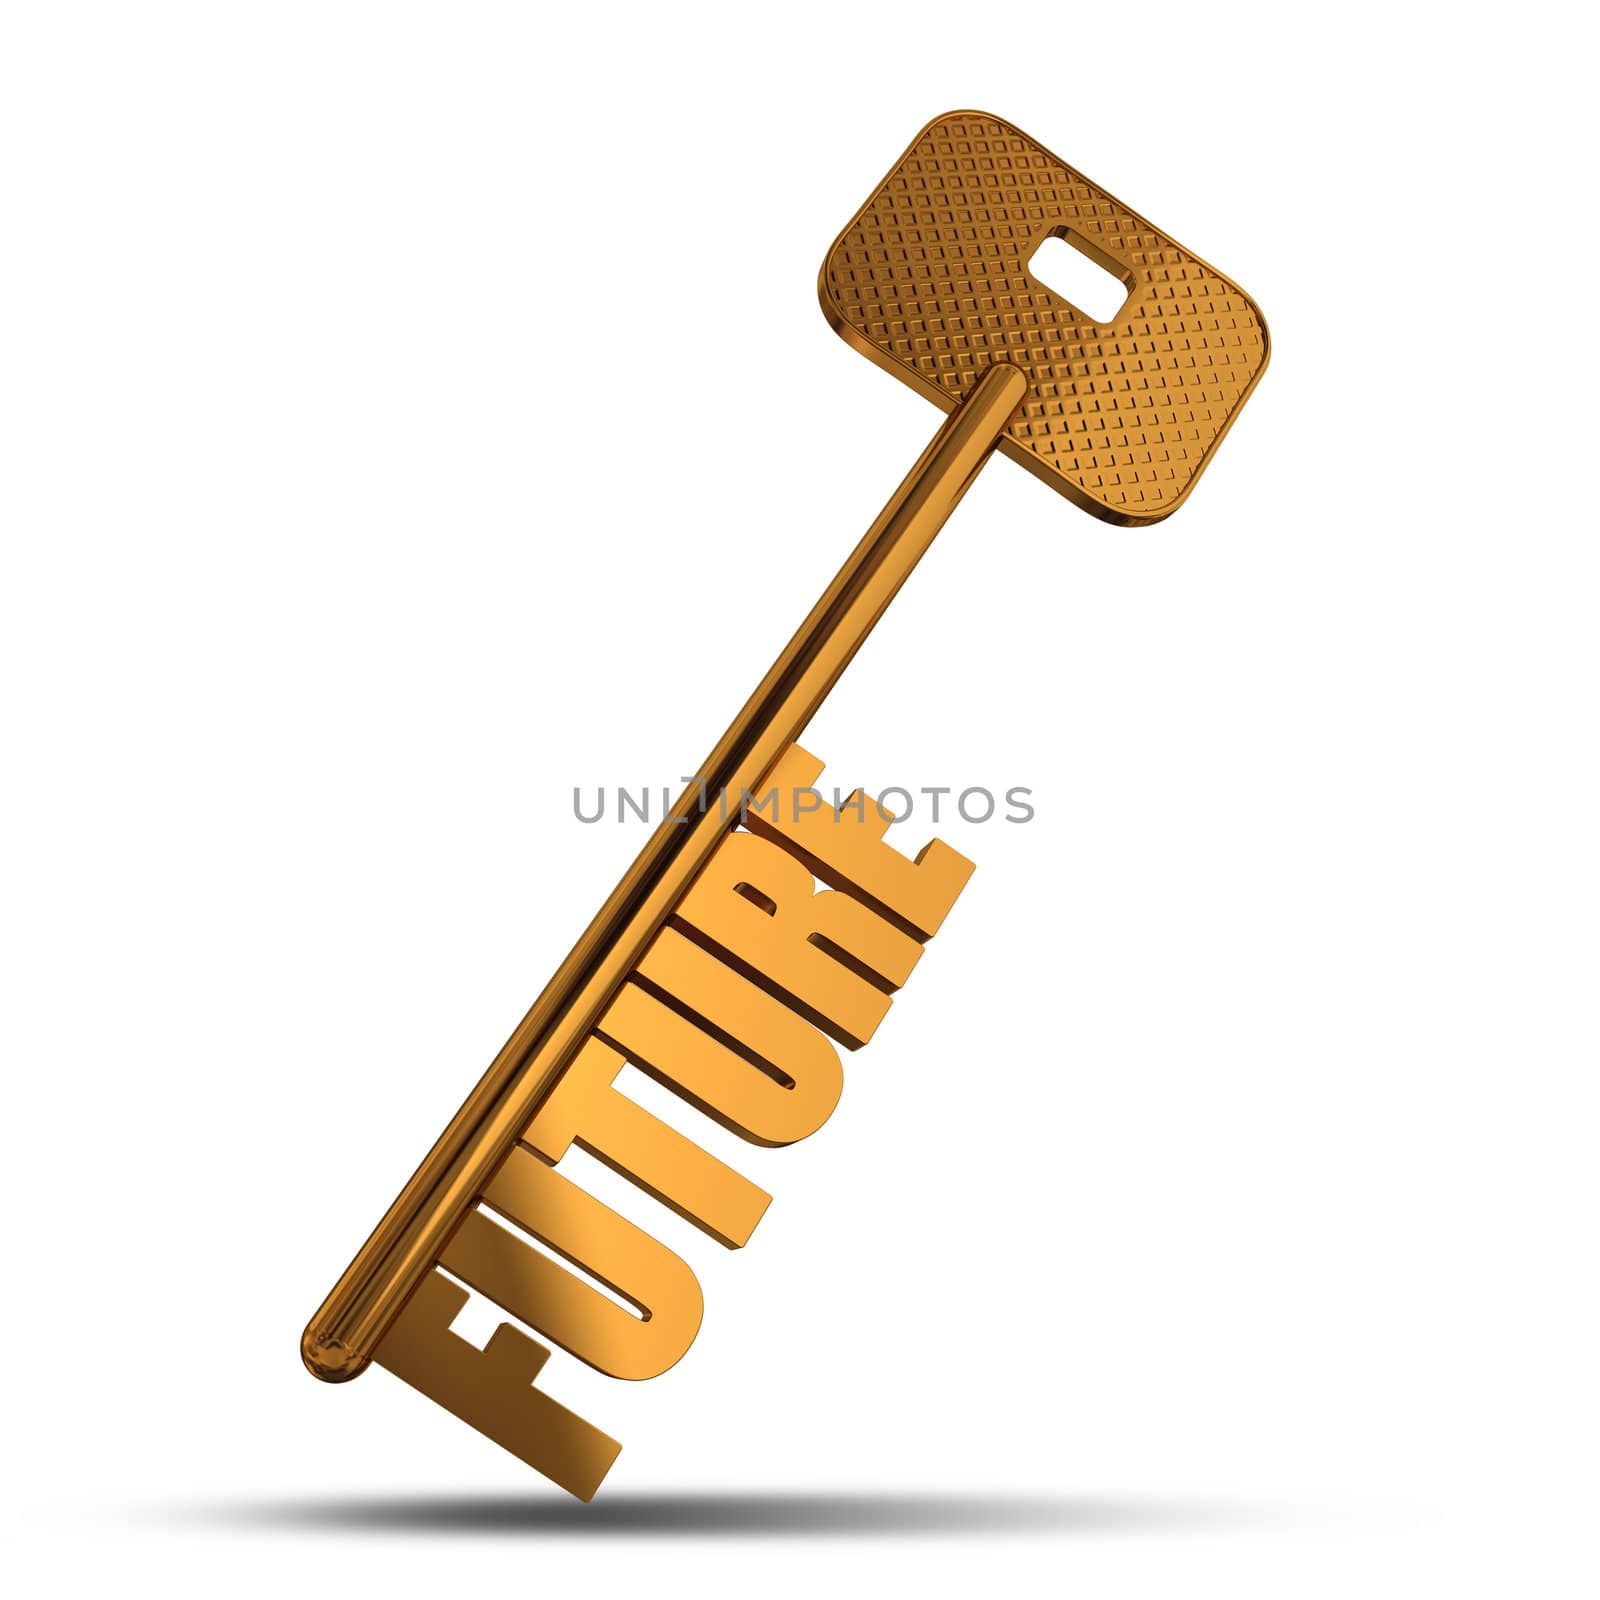 Future gold key isolated on white  background - Gold key with Future text as symbol for success in business - Conceptual image